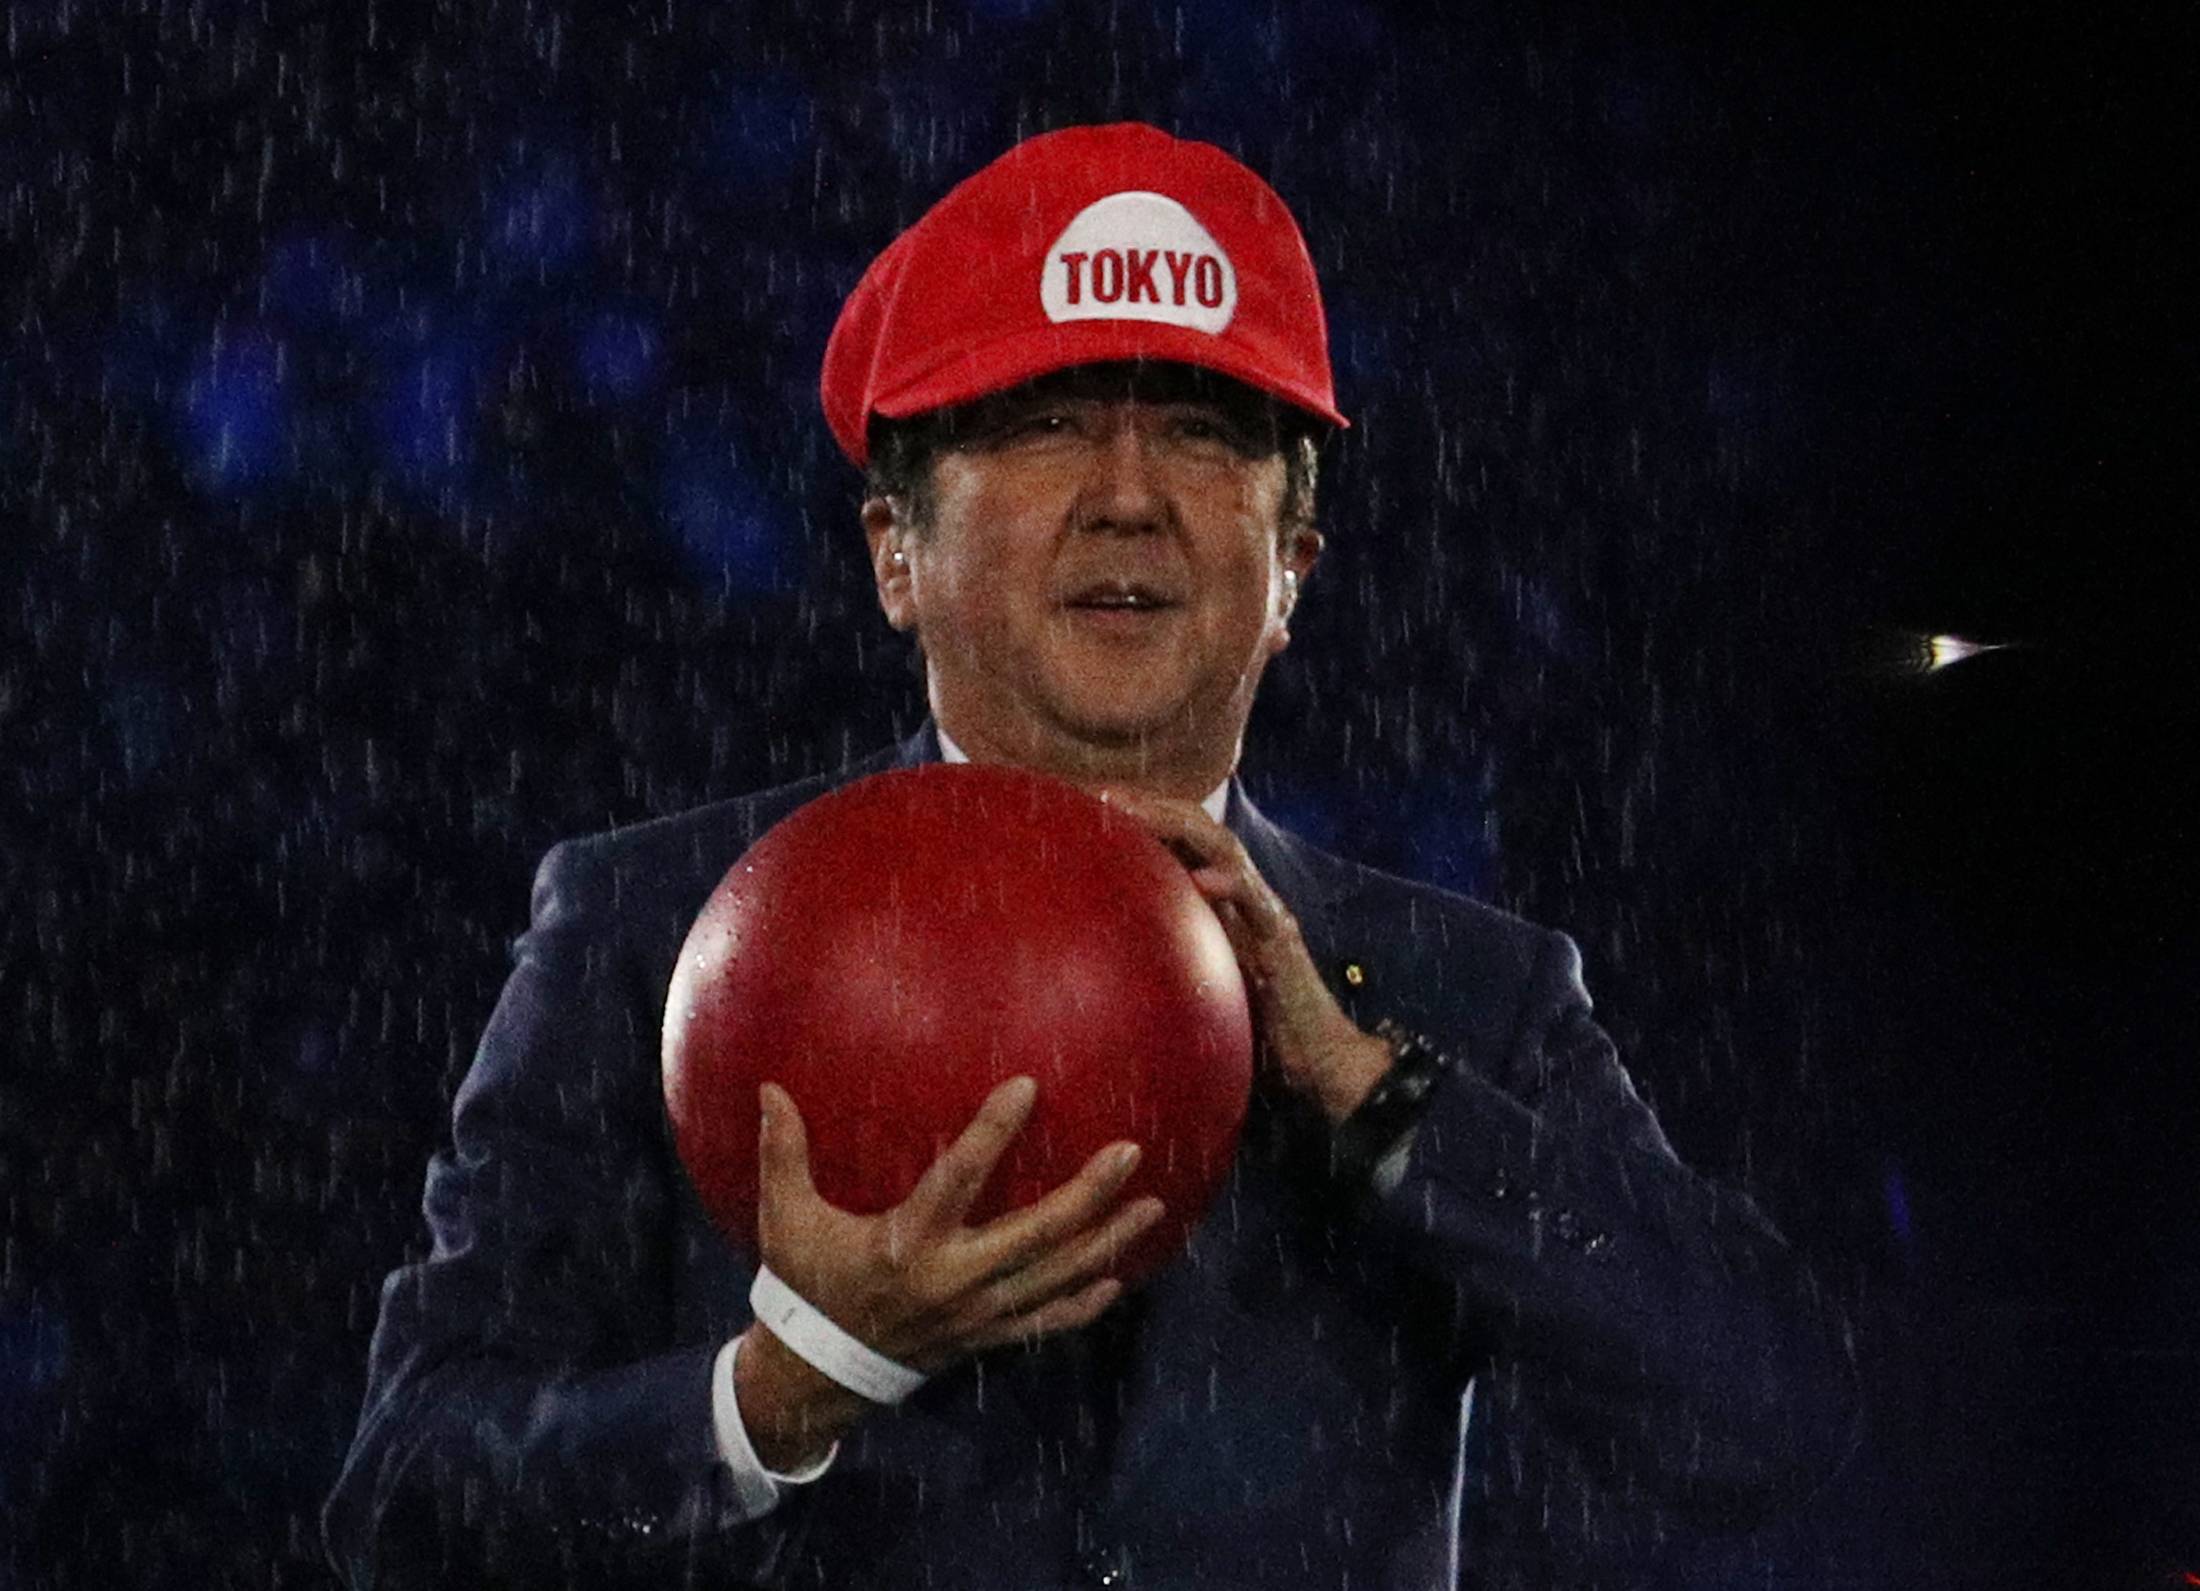 Prime Minister Shinzo Abe attends the 2016 Rio Olympics closing ceremony dressed as Super Mario in Rio de Janeiro on Aug. 21 2016.  | REUTERS